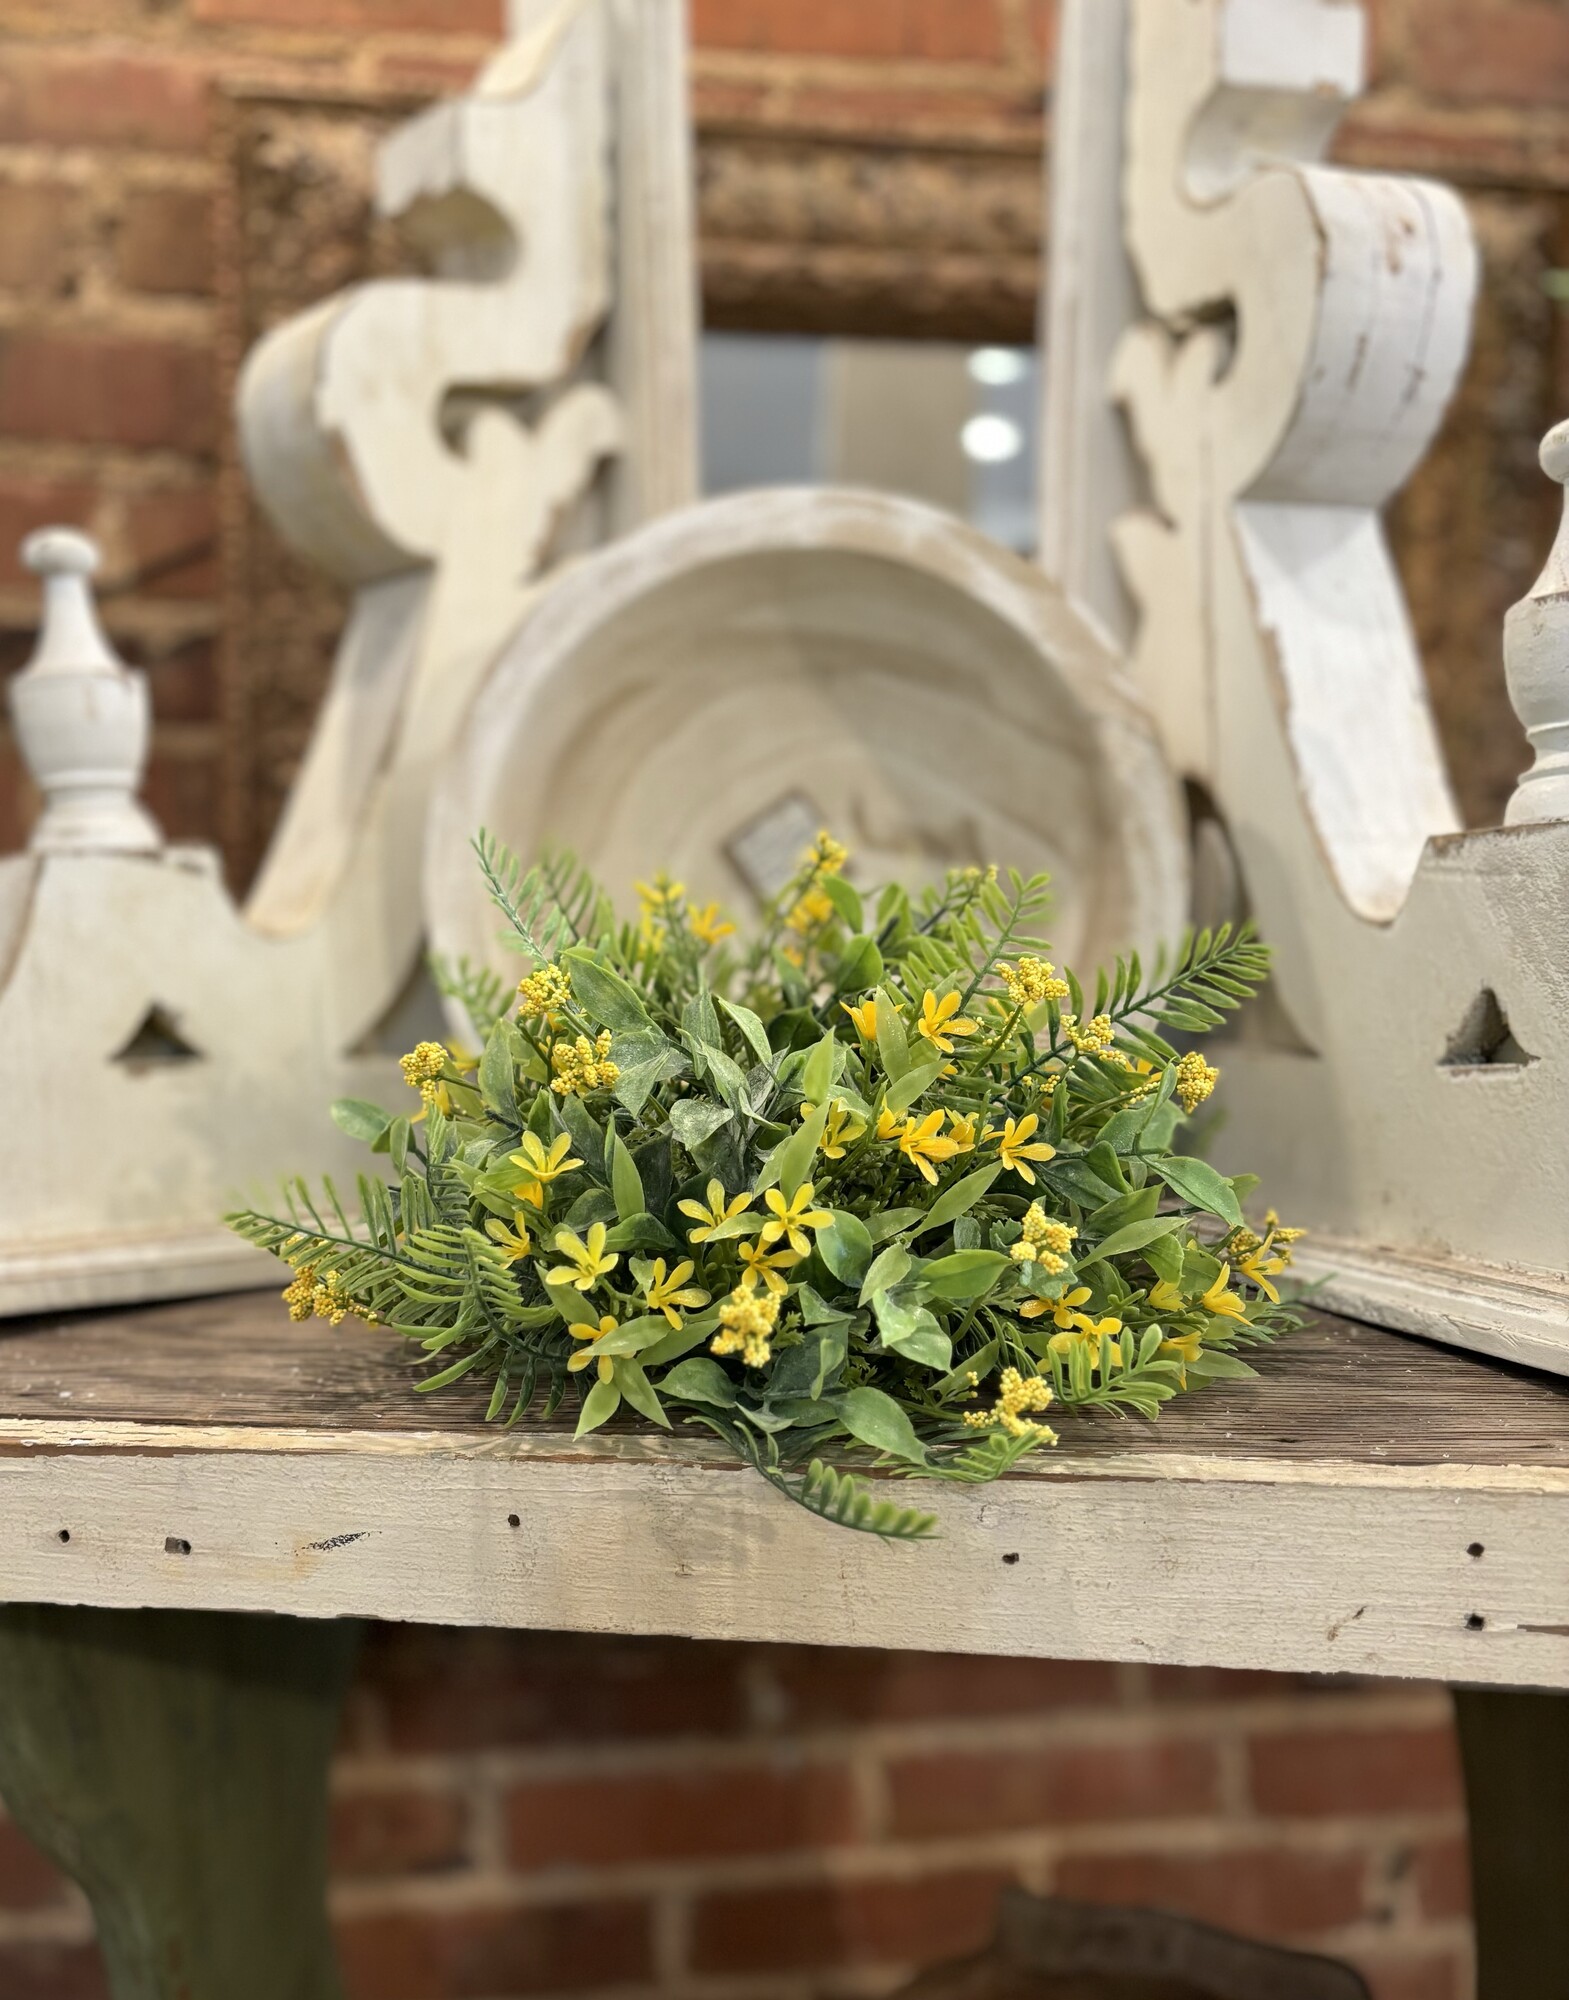 Our newest addition of half spheres is the gorgeous Yellow Fernshot. A perfect half sphere for your spring or summer decor. This beauty measures 12 inches around  and has a mixture of yellow flowers and ferns